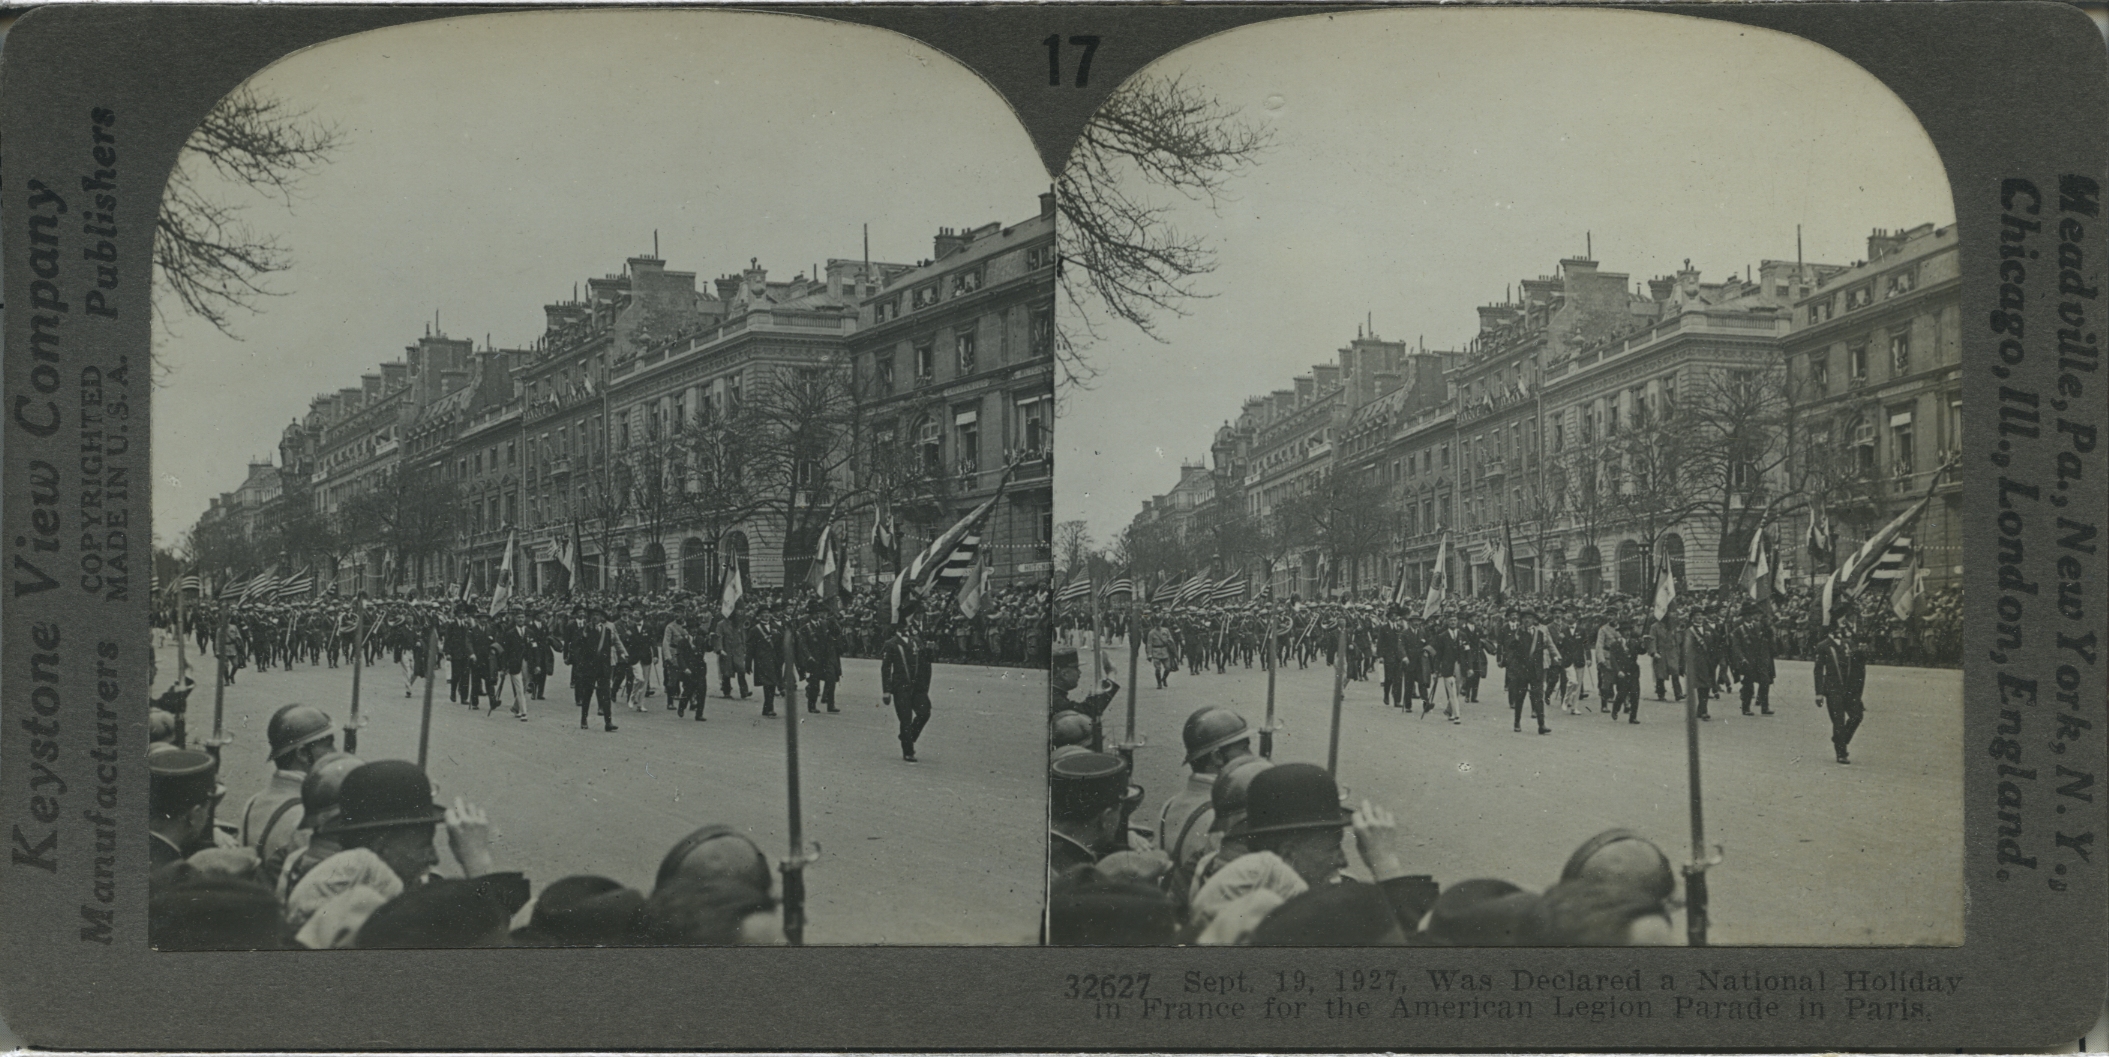 Sept. 19, 1927, Was Declared a National Holiday in France for the American Legion Parade in Paris.